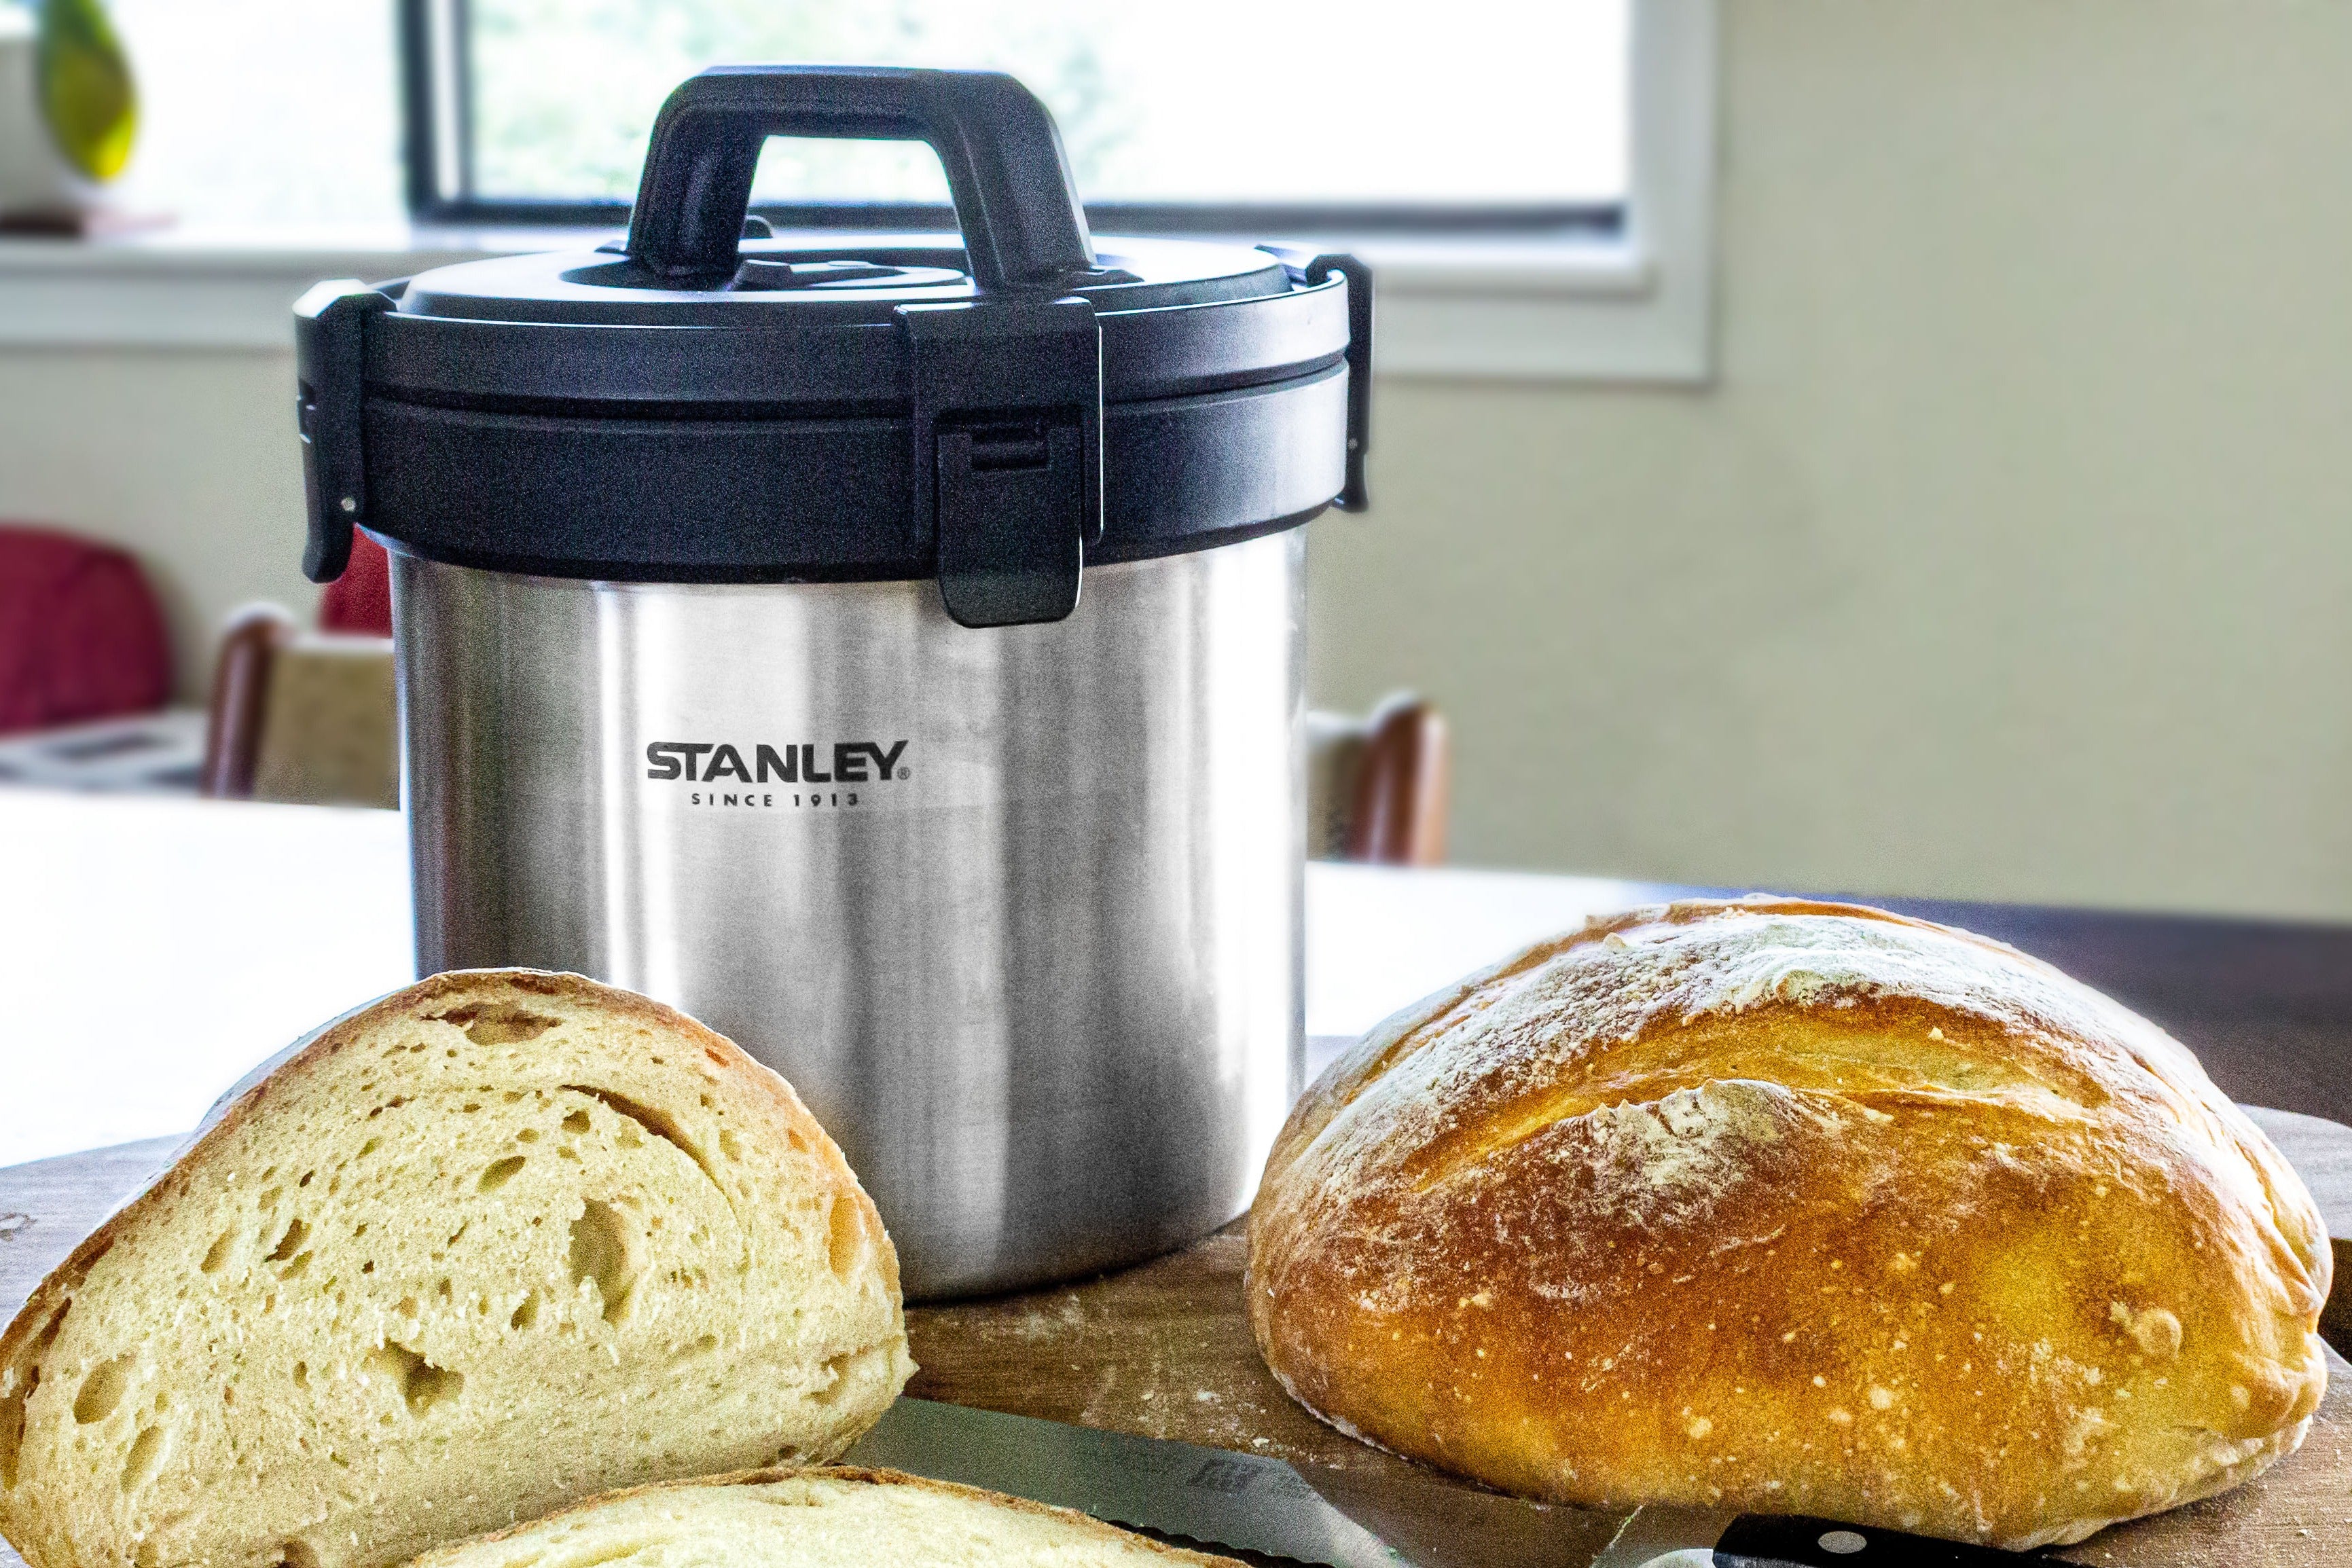 A Stanley Tale Of The Sourdough Starter